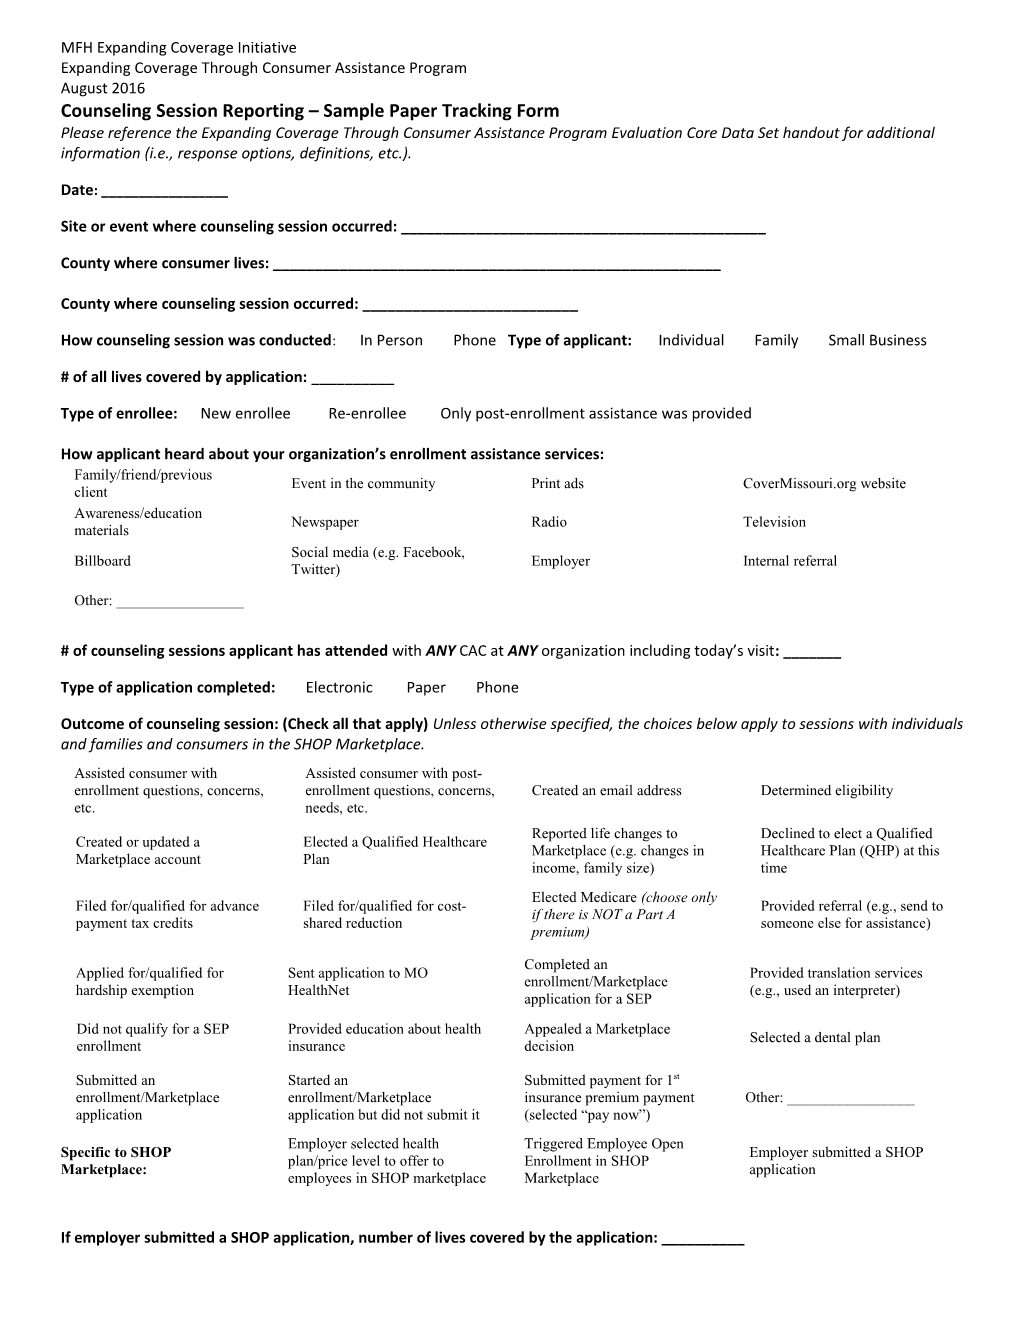 Counseling Session Reporting Sample Paper Tracking Form